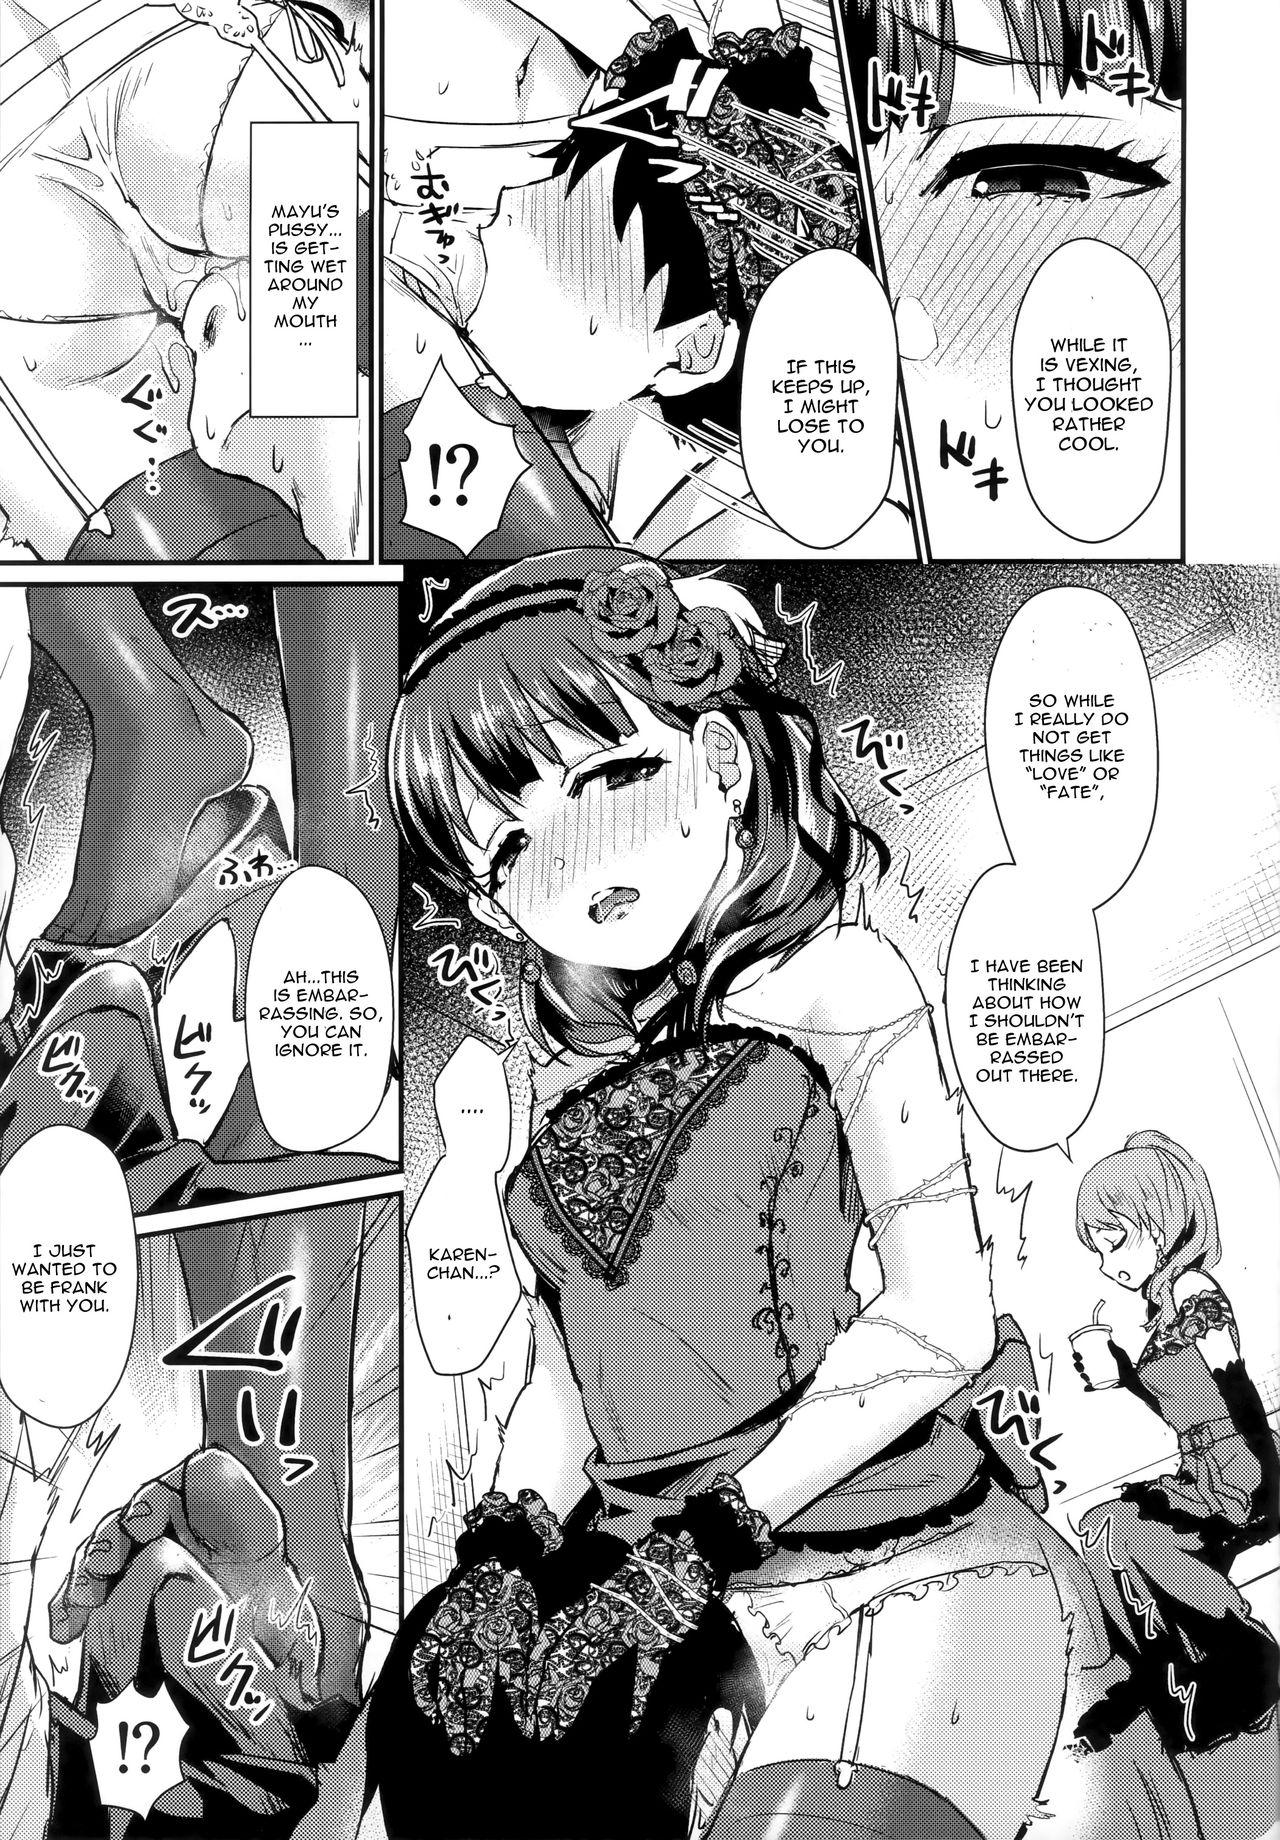 Ghetto Don't stop my pure love - The idolmaster Hard Core Porn - Page 10